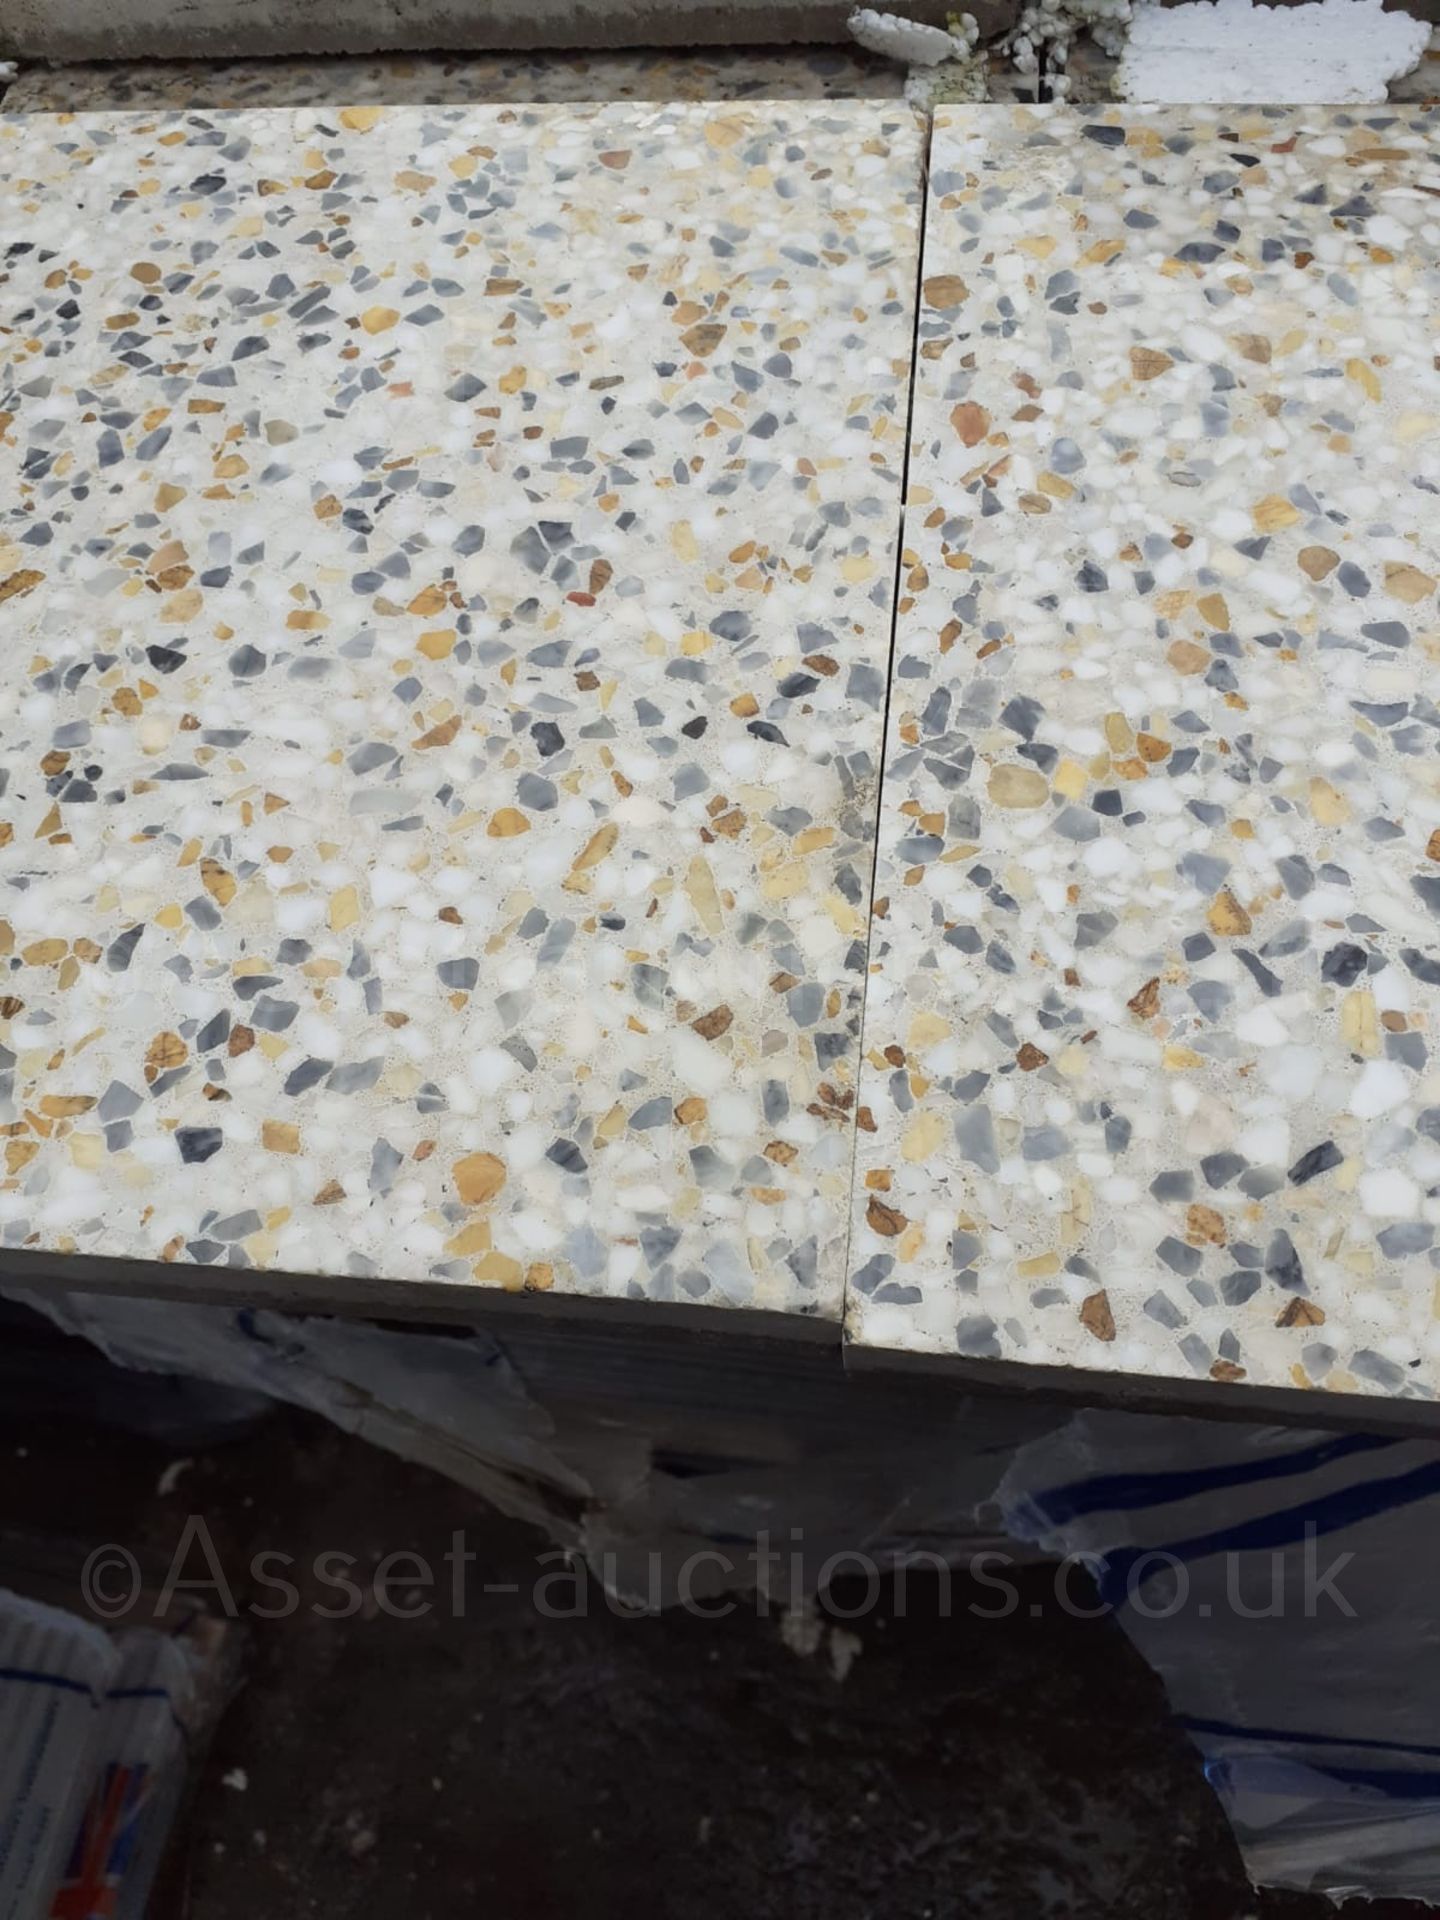 1 PALLET OF BRAND NEW TERRAZZO COMMERCIAL FLOOR TILES (TDE9), COVERS 24 SQUARE YARDS *PLUS VAT* - Image 3 of 3